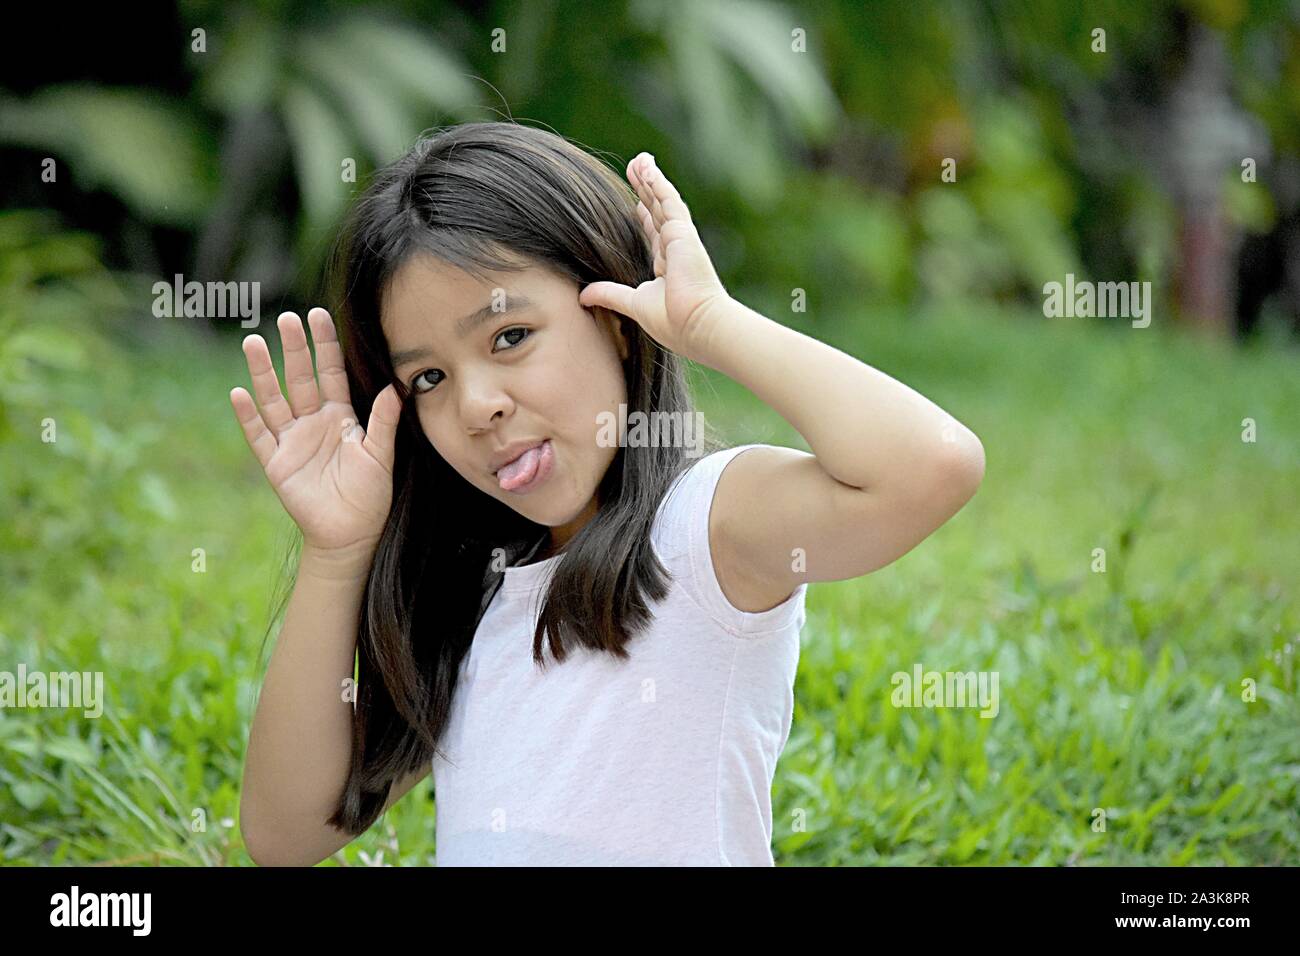 Young Asian Preteen Making Funny Faces Stock Photo